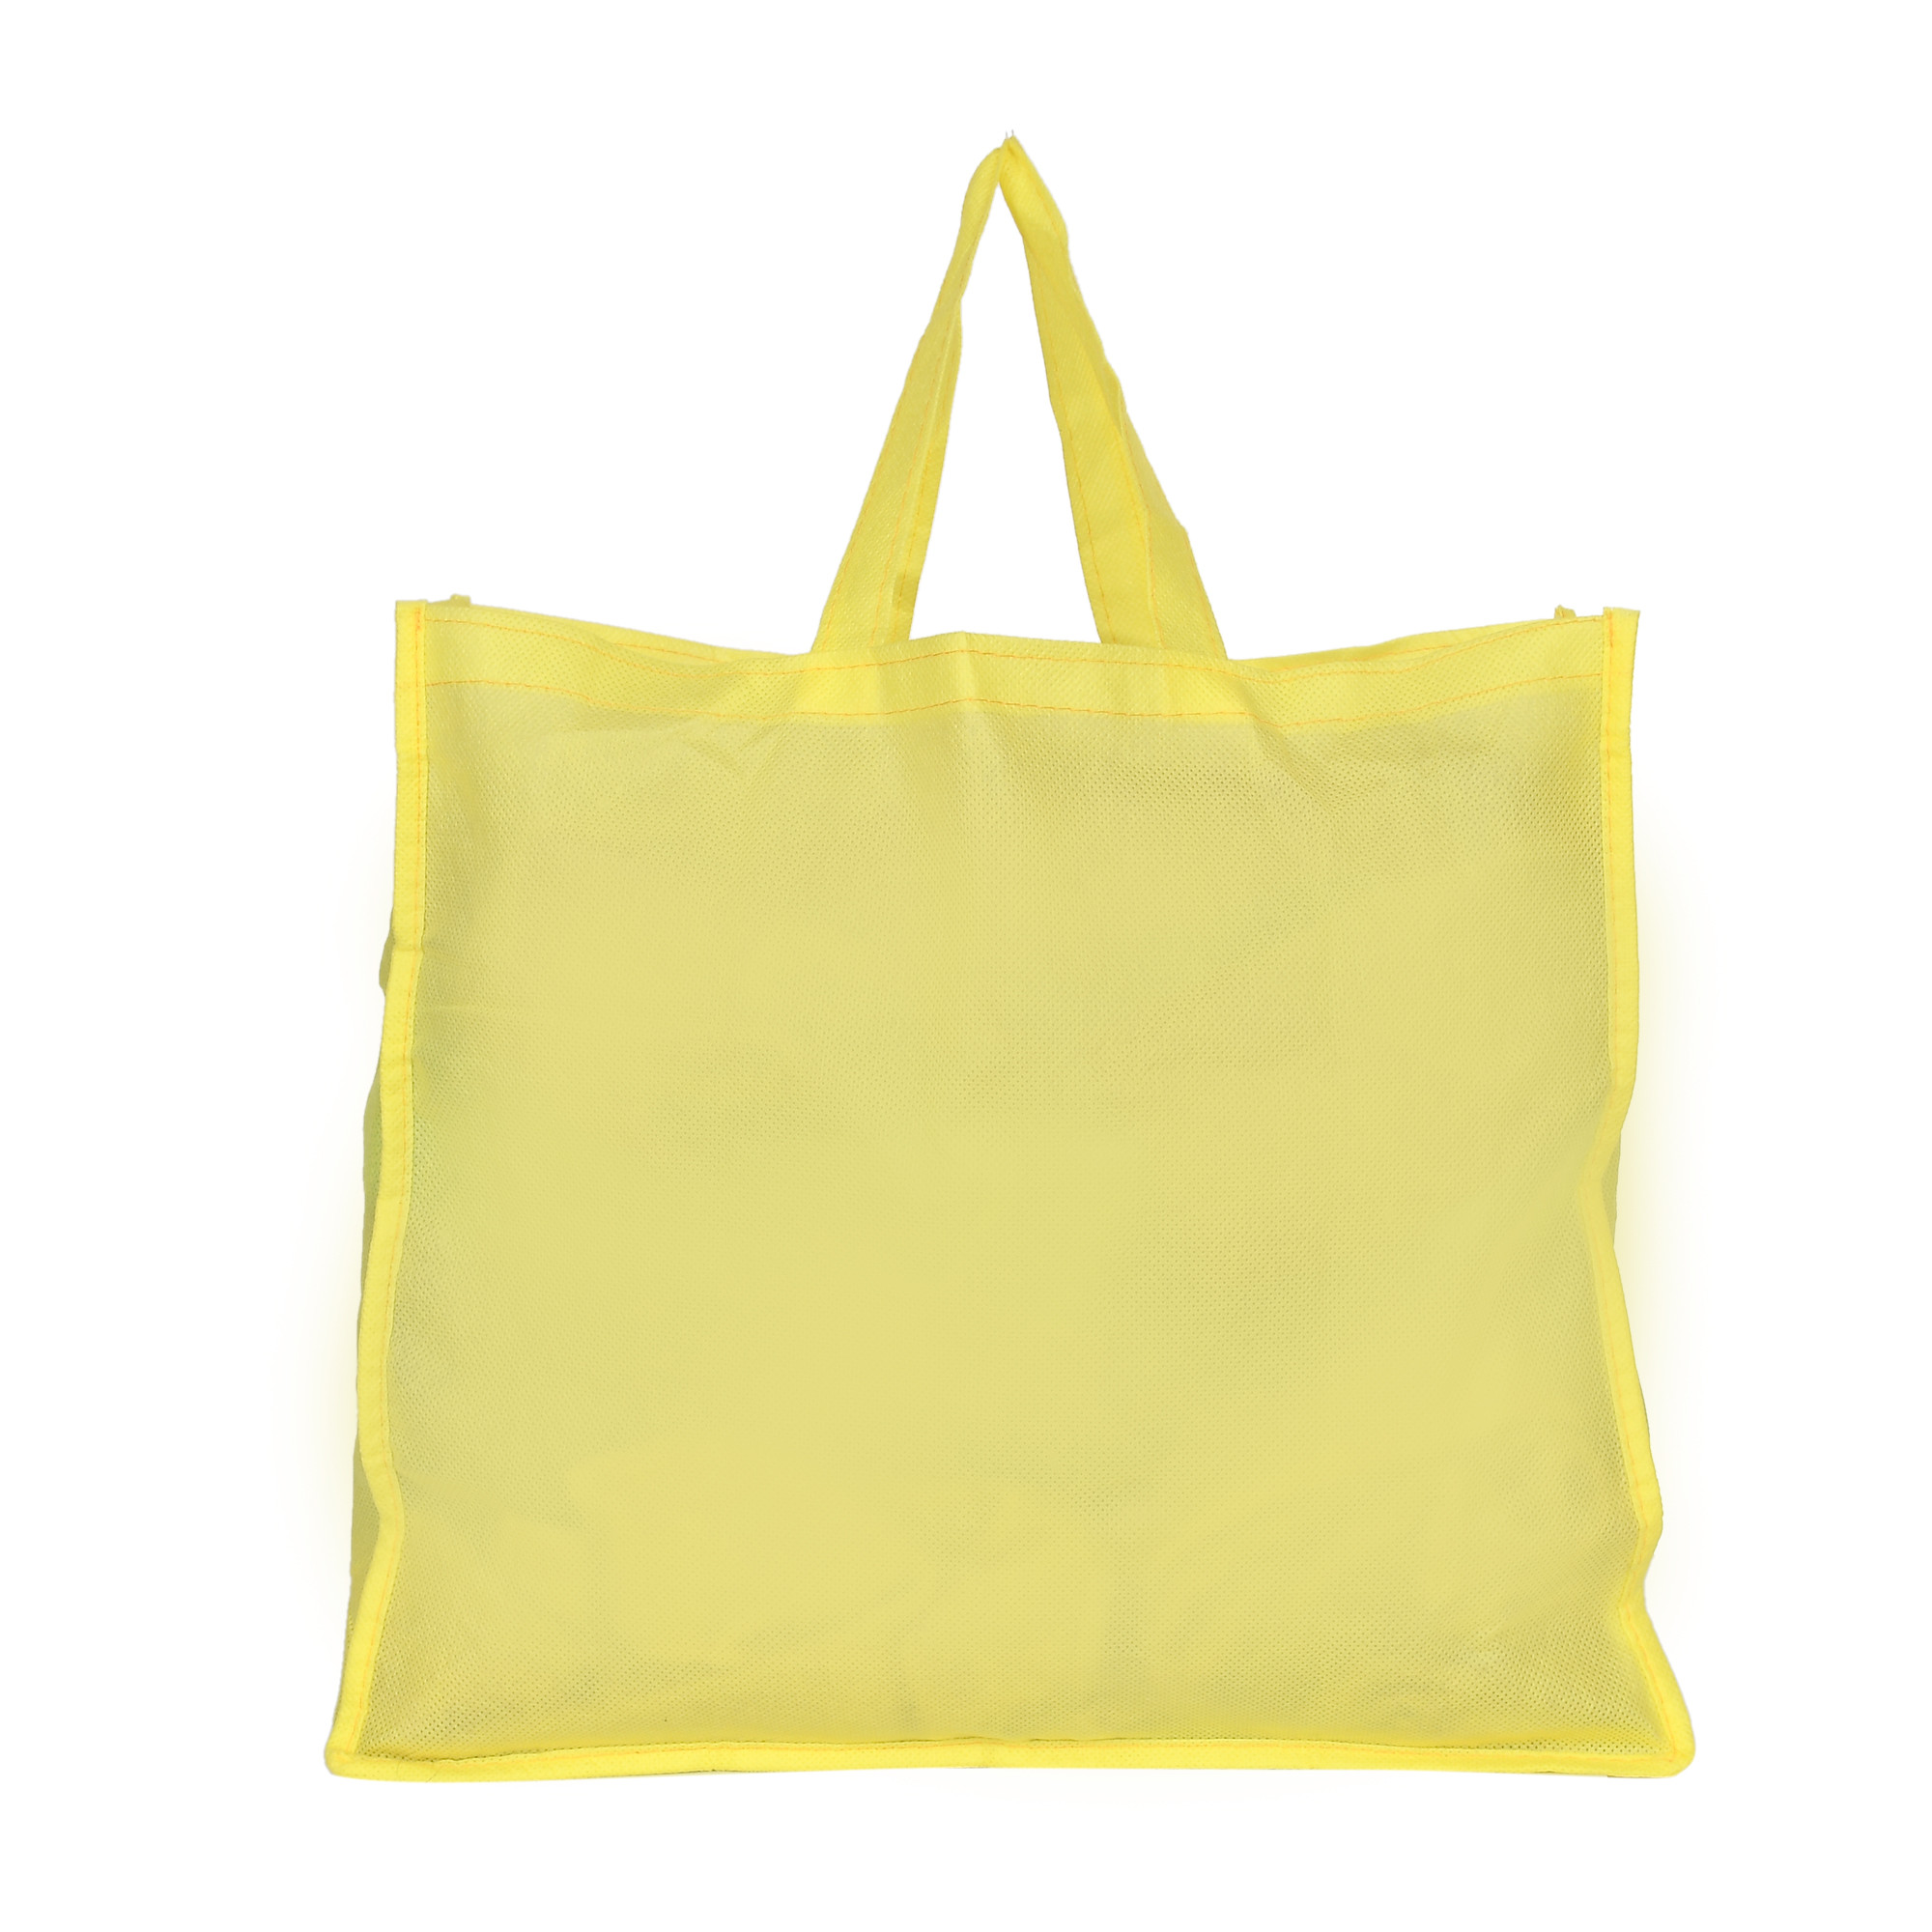 Kuber Industries Shopping Grocery Bags Foldable, Washable Grocery Tote Bag with One Small Pocket, Eco-Friendly Purse Bag Fits in Pocket Waterproof & Lightweight (Orange & Yellow)